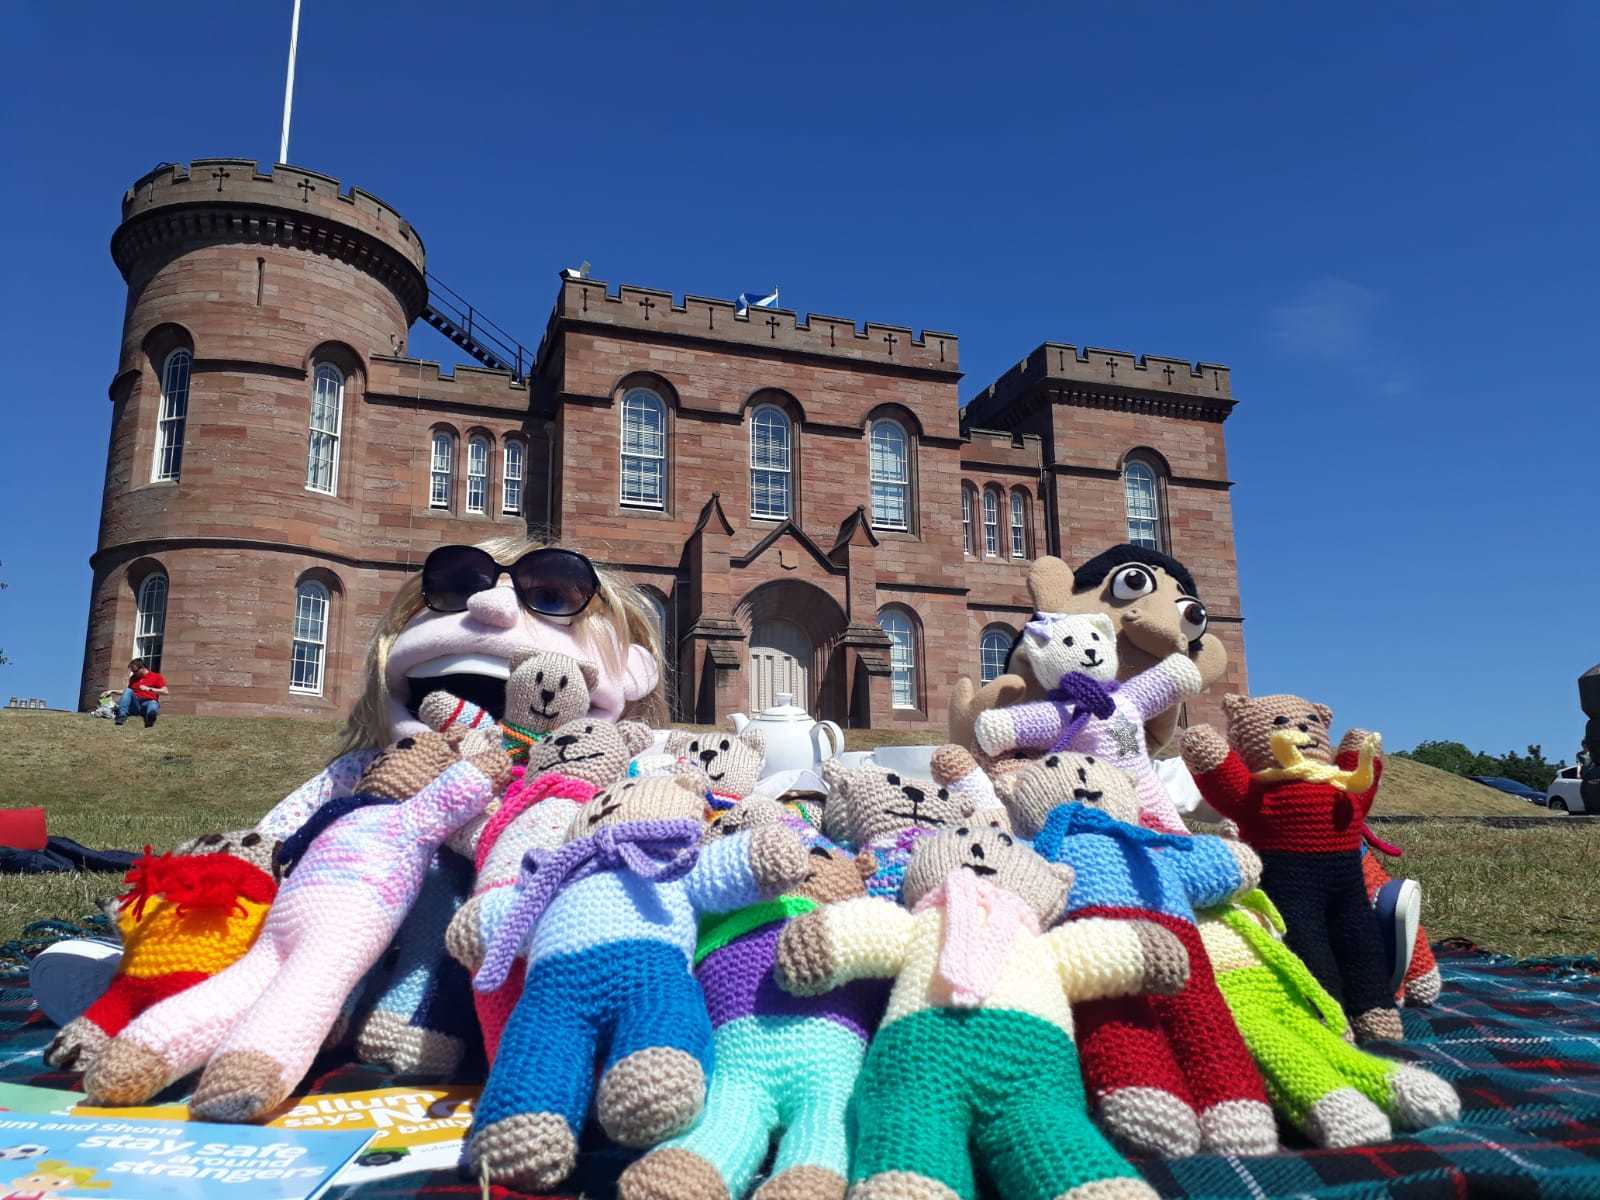 The teddies at Inverness Castle.